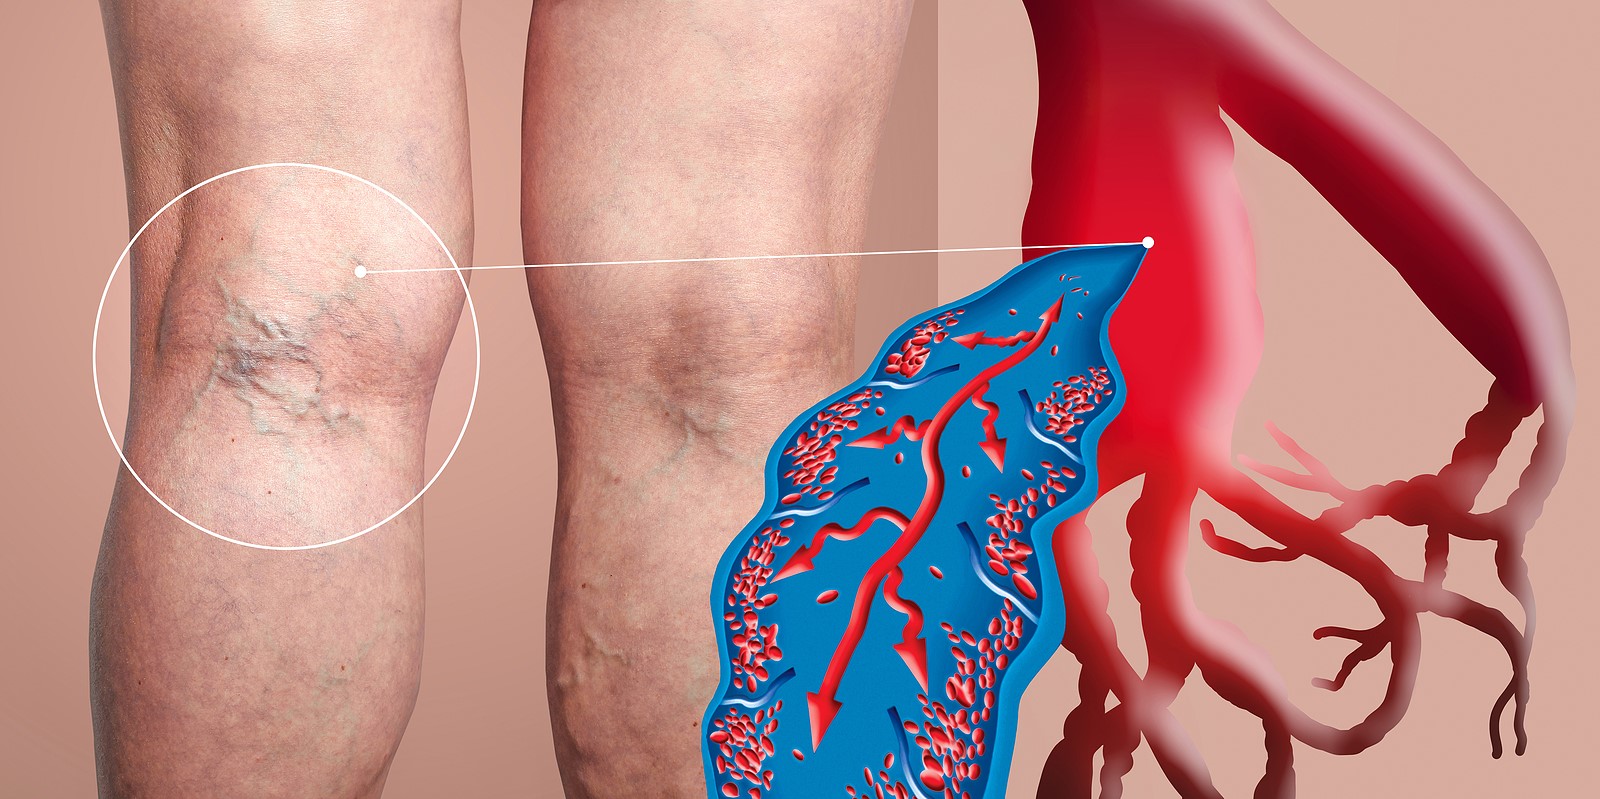 What Are The Major Symptoms Of Blood Clot In Leg